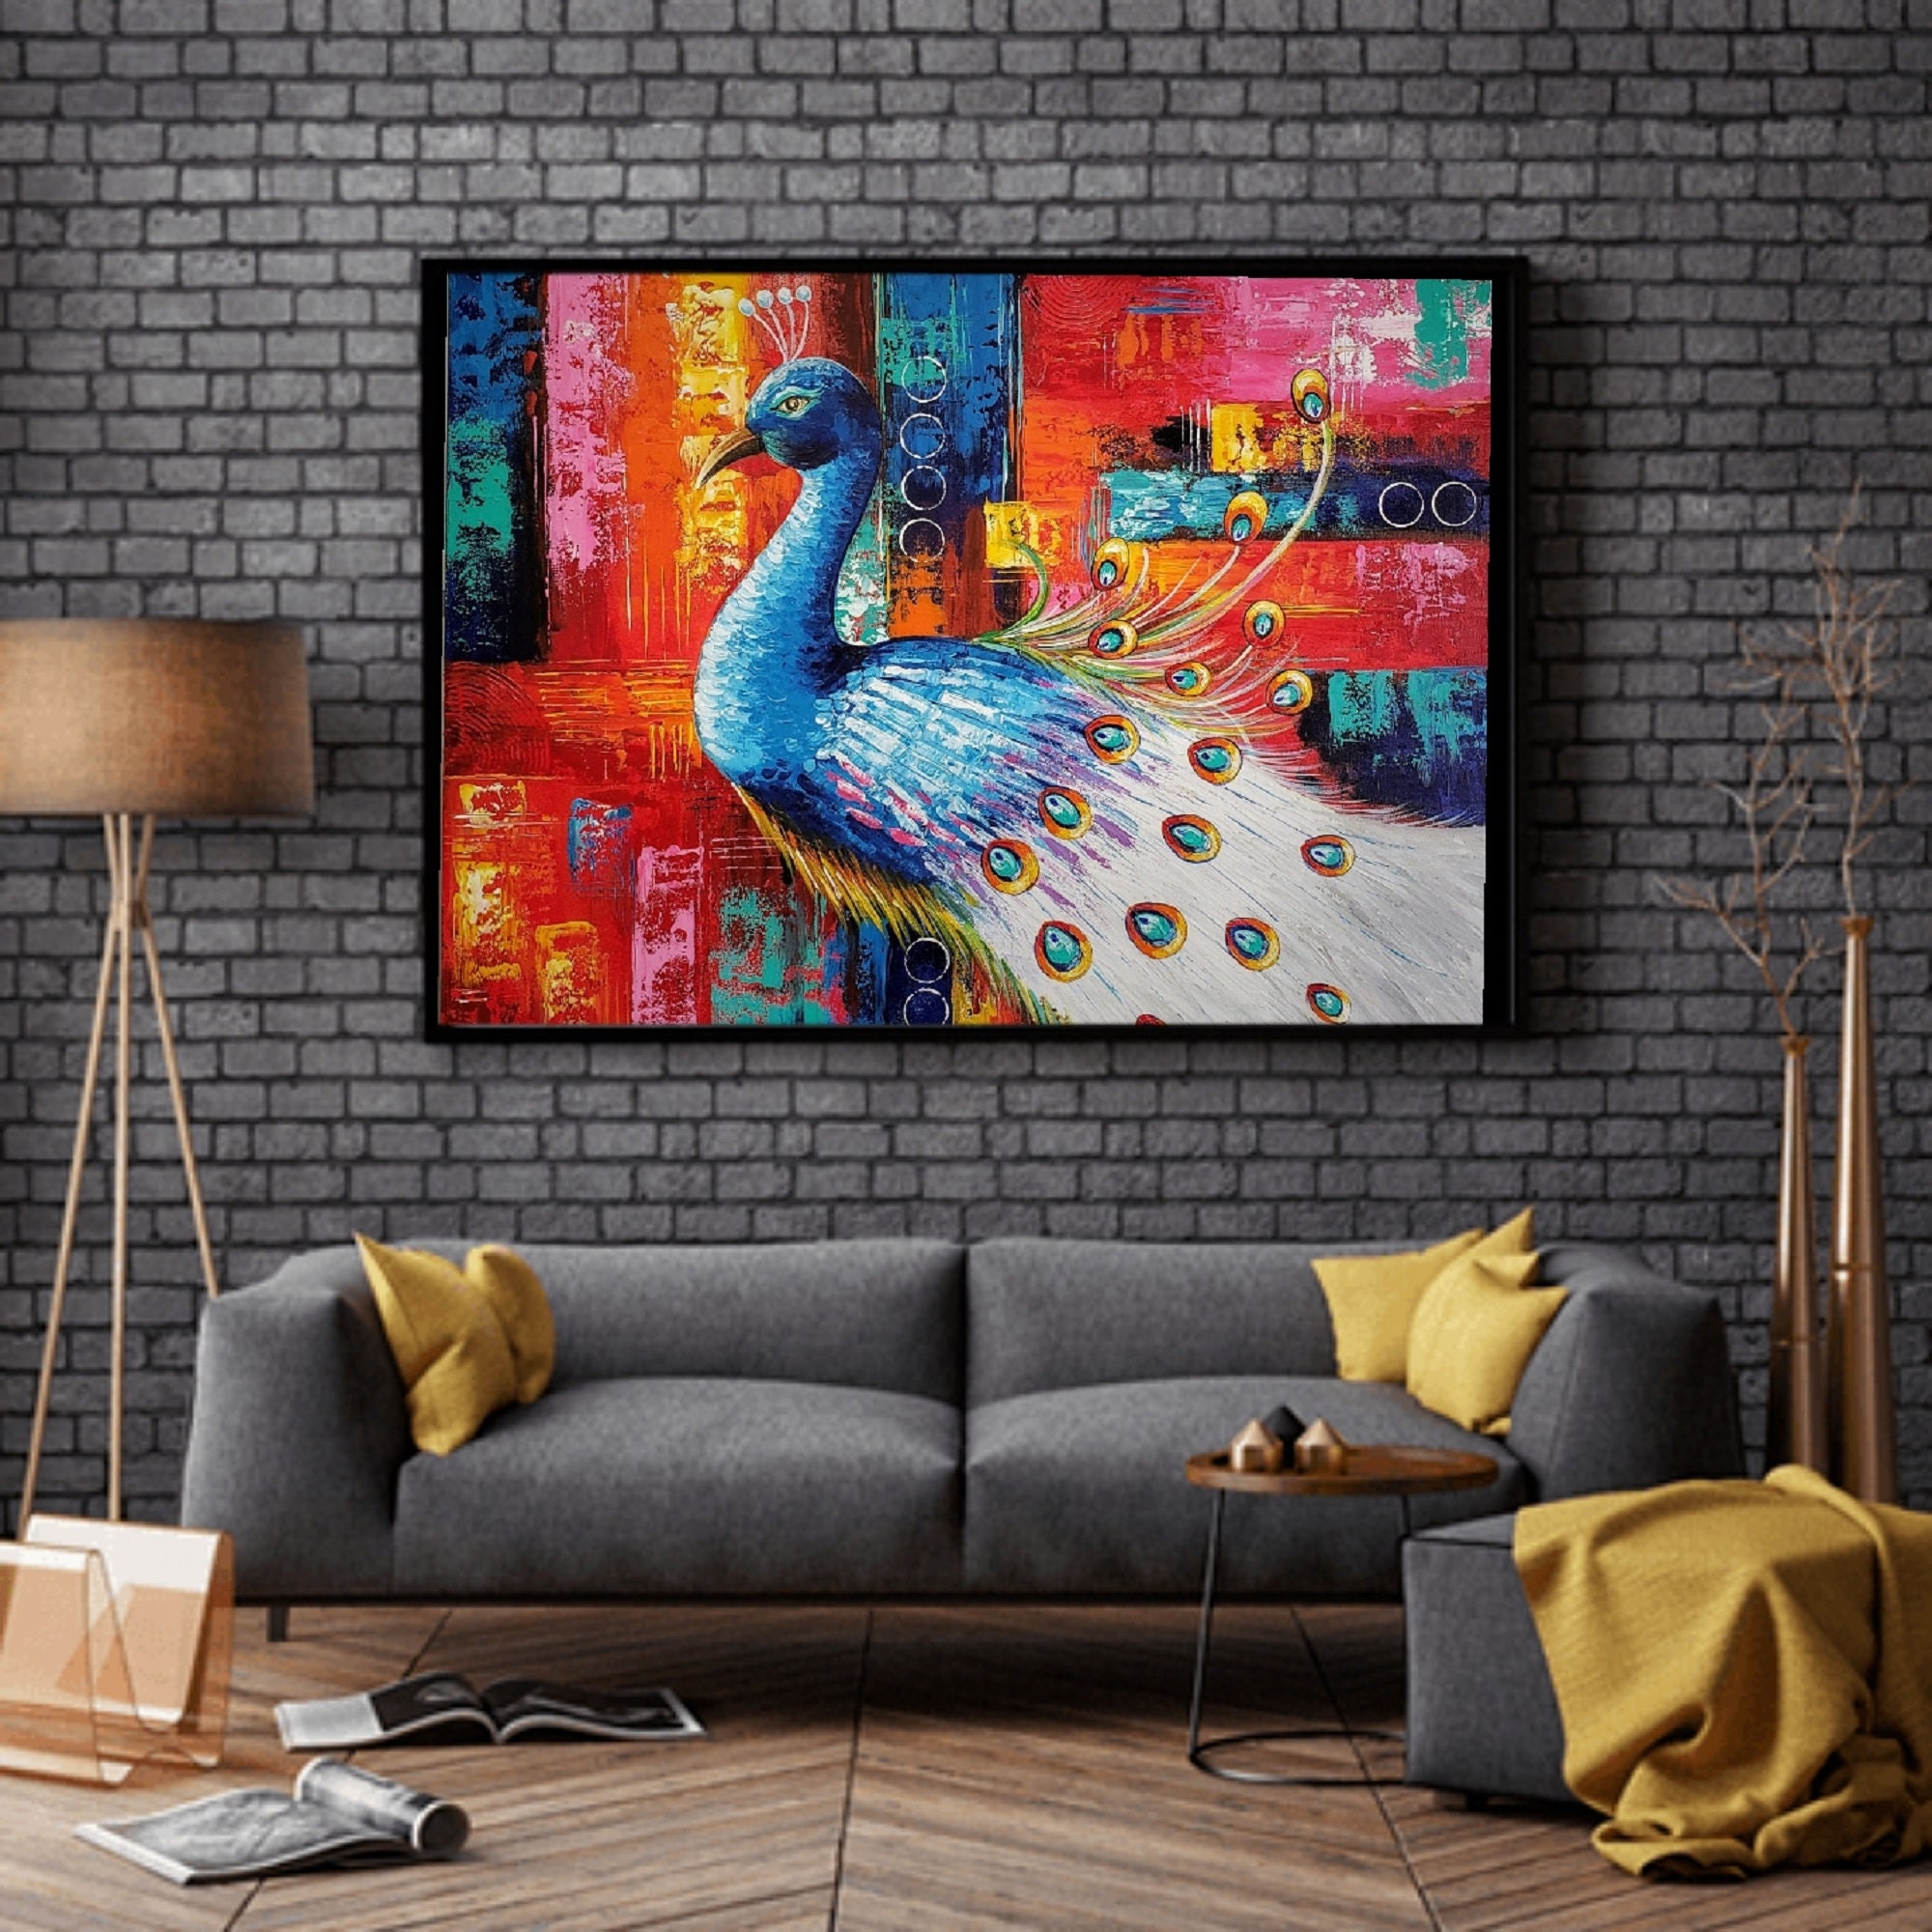 White Peacock Abstract Peacock Painting Wall Decor Modern - Etsy